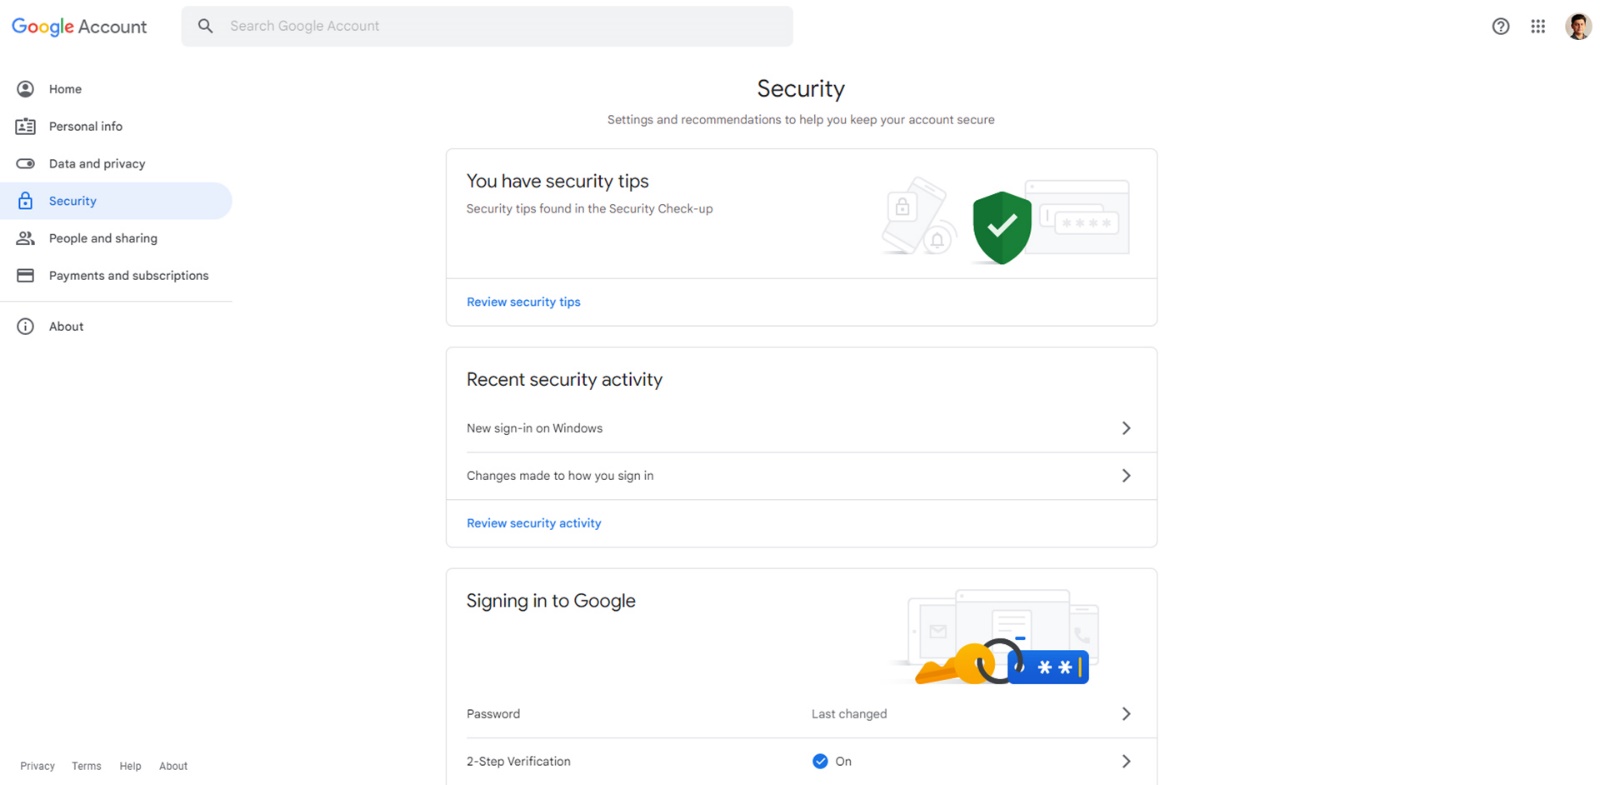 Google account security section